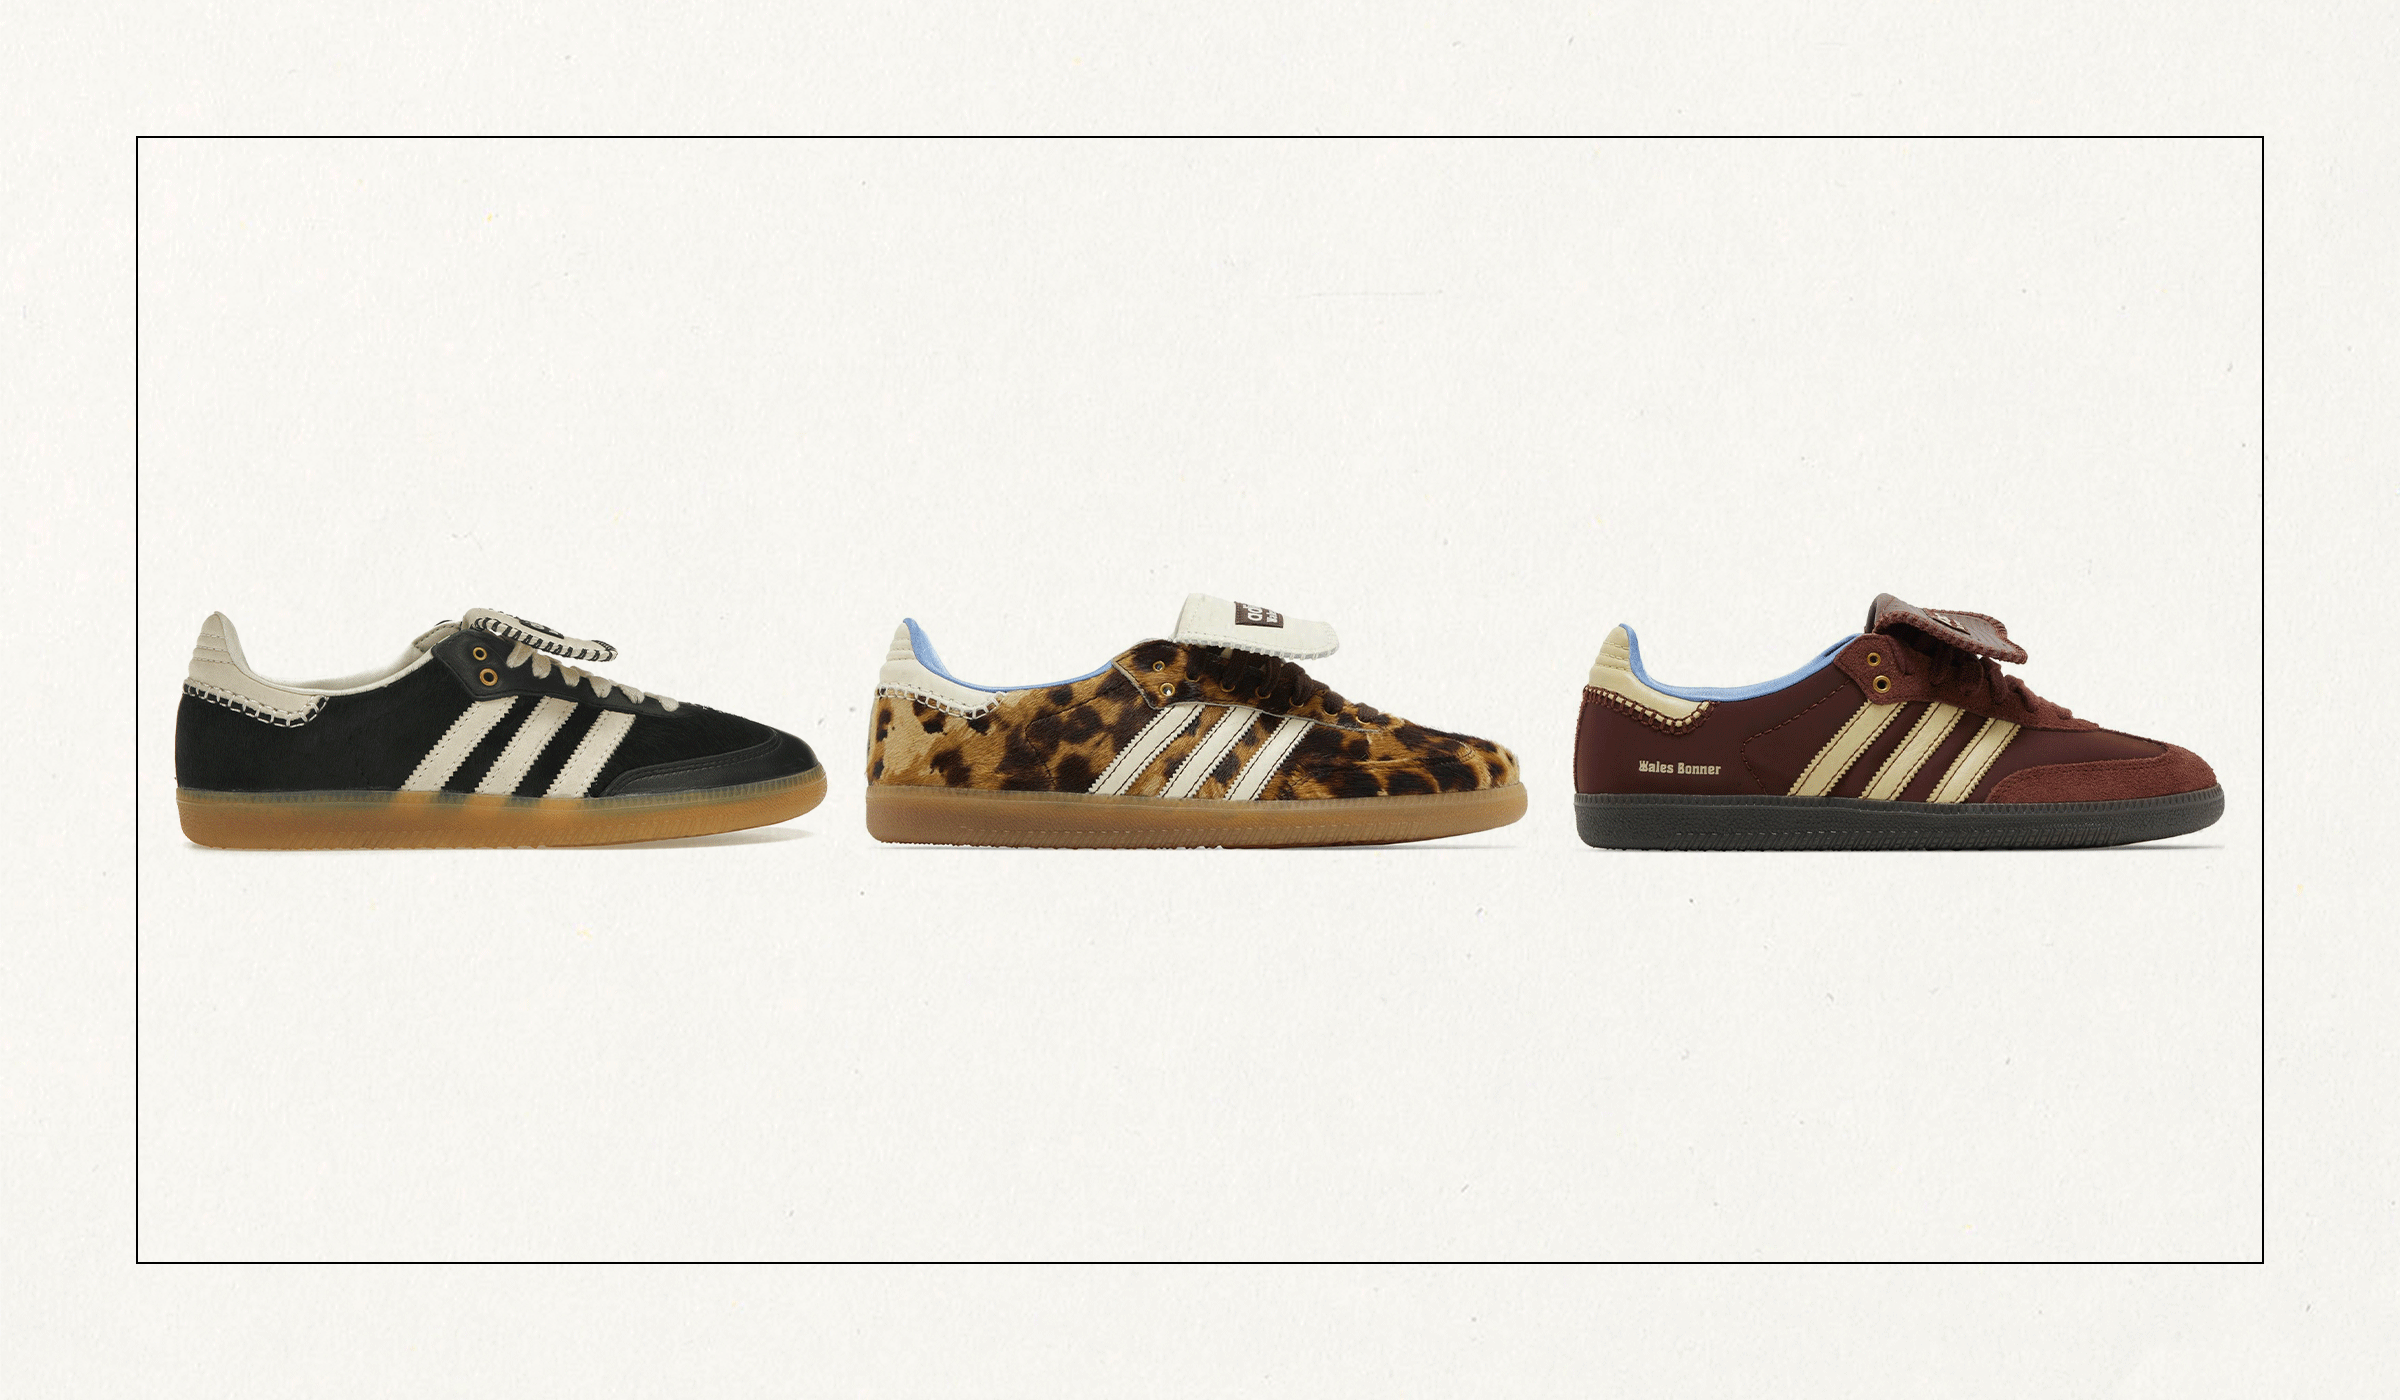 Motion gifs of different Adidas Samba sneakers